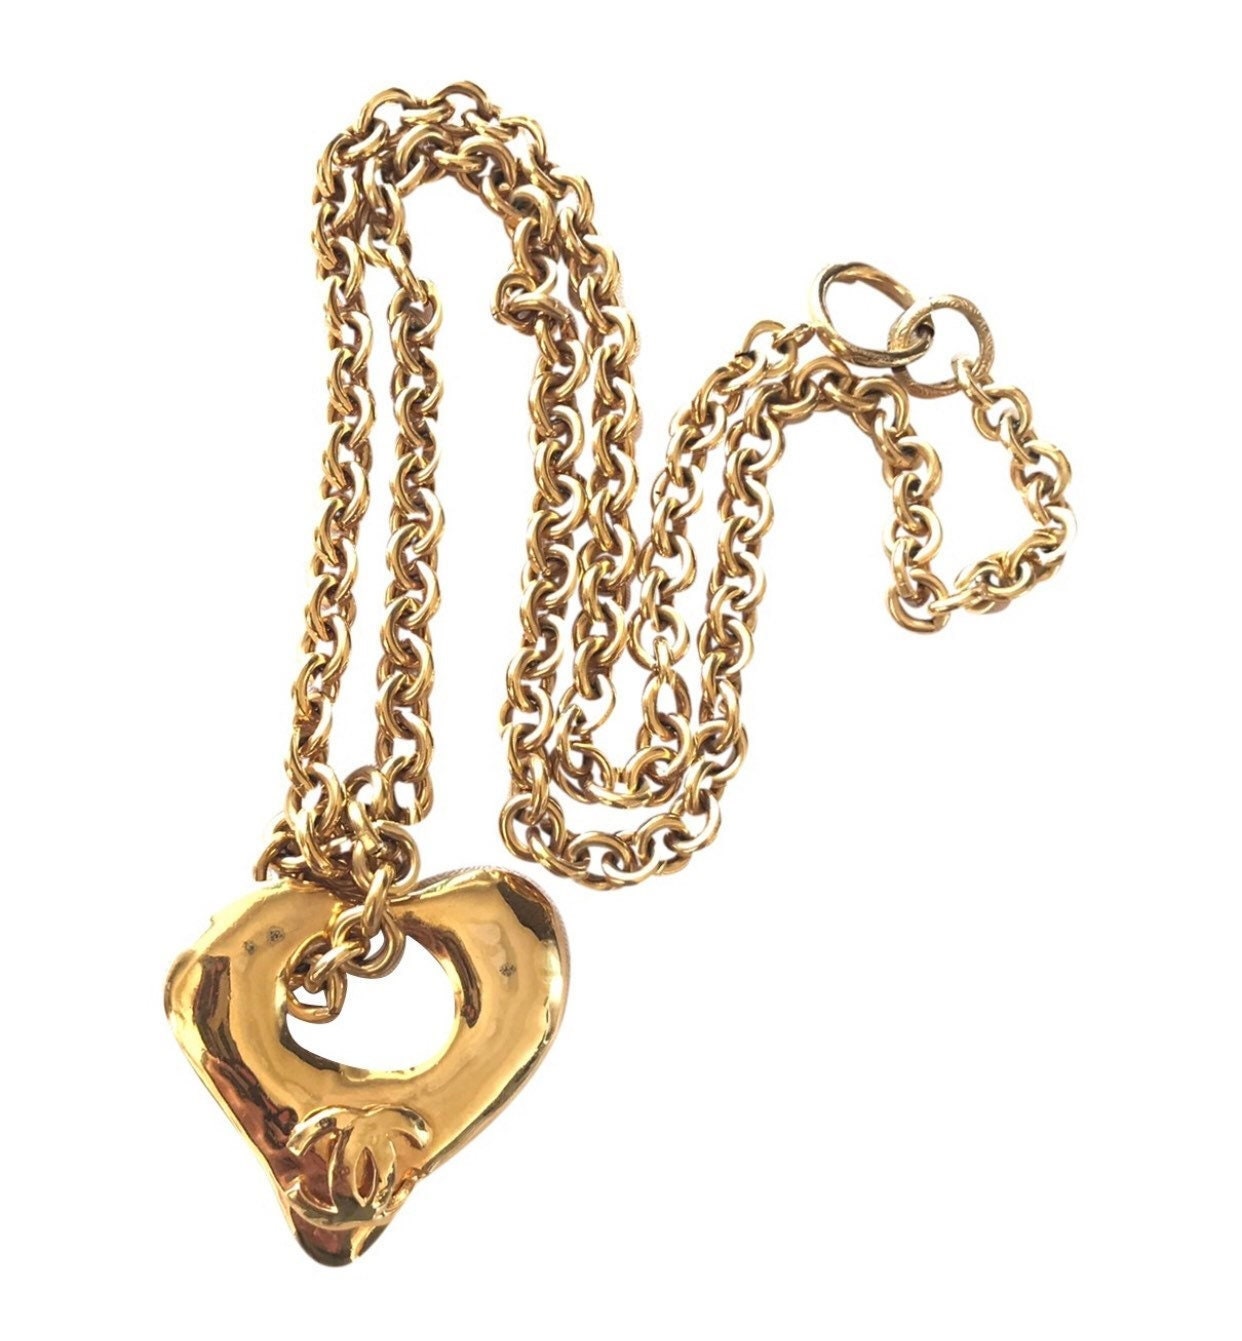 CHANEL Resin Crystal CC Heart Necklace Pearly White Gold 998267   FASHIONPHILE